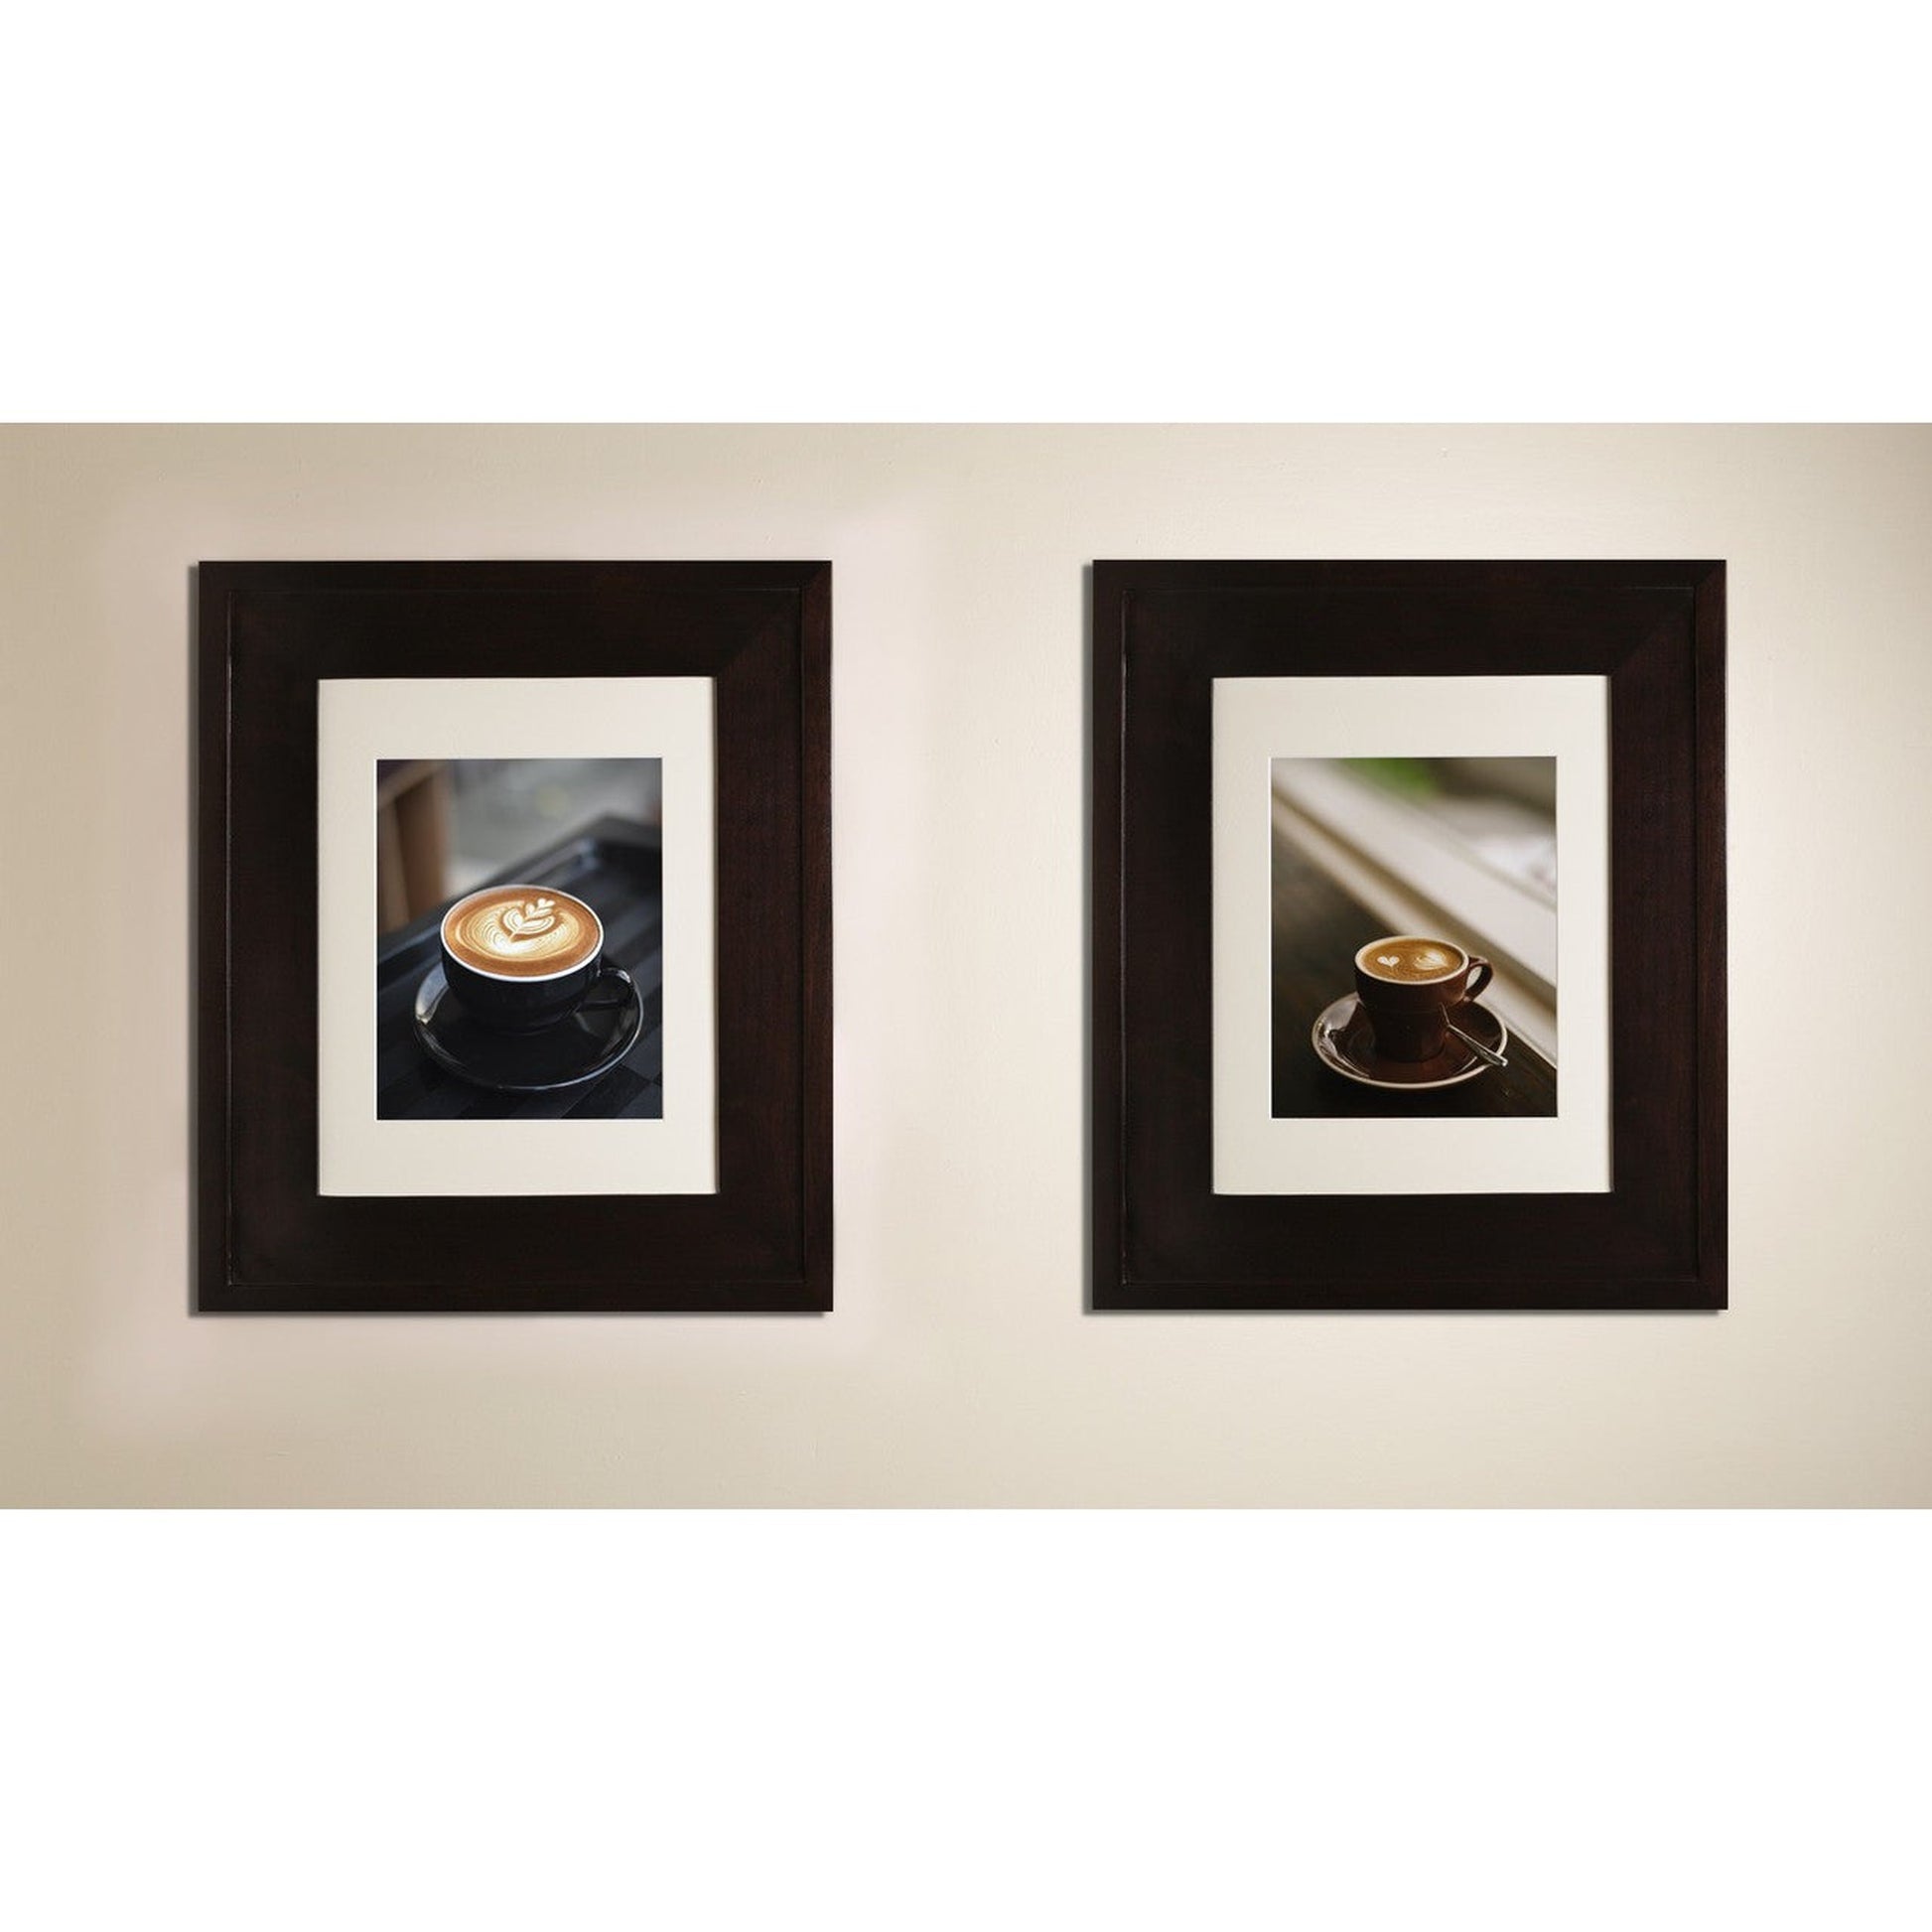 Fox Hollow Furnishings 14" x 16" Coffee Bean Regular Special 3" Depth Recessed Picture Frame Medicine Cabinet